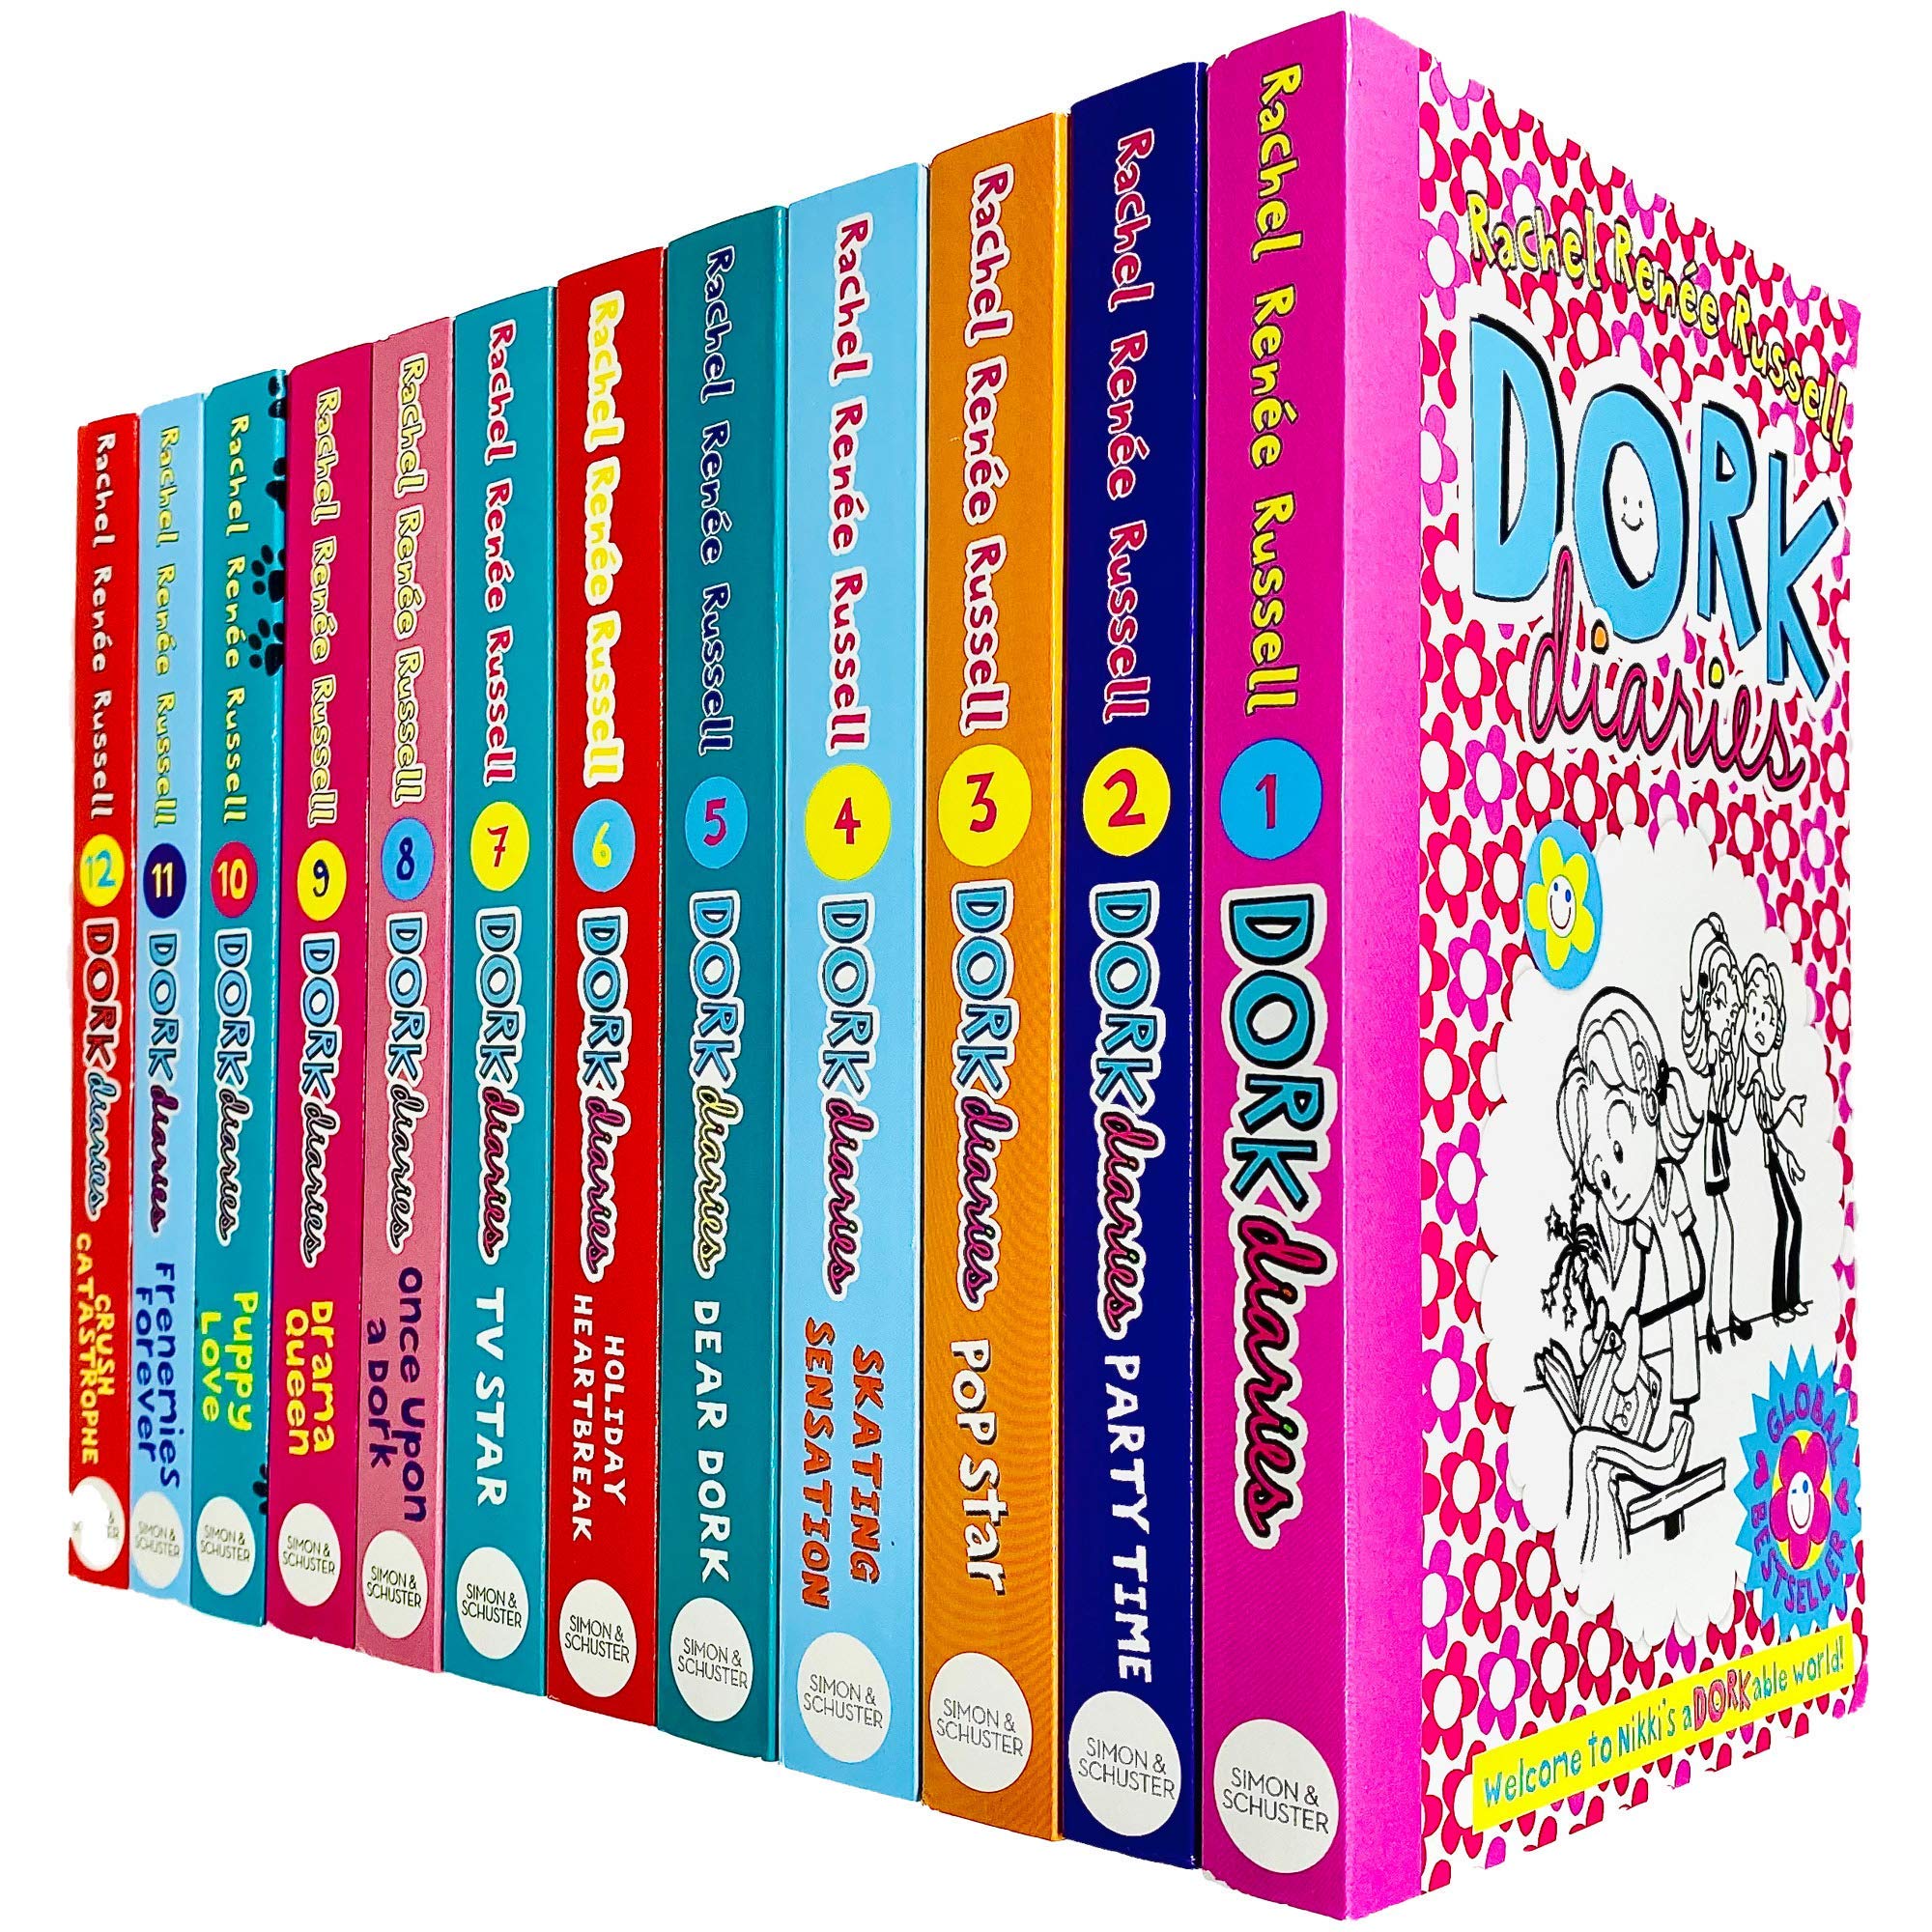 Dork Diaries Series 10 Books Collection Set By Rachel Renee Russell